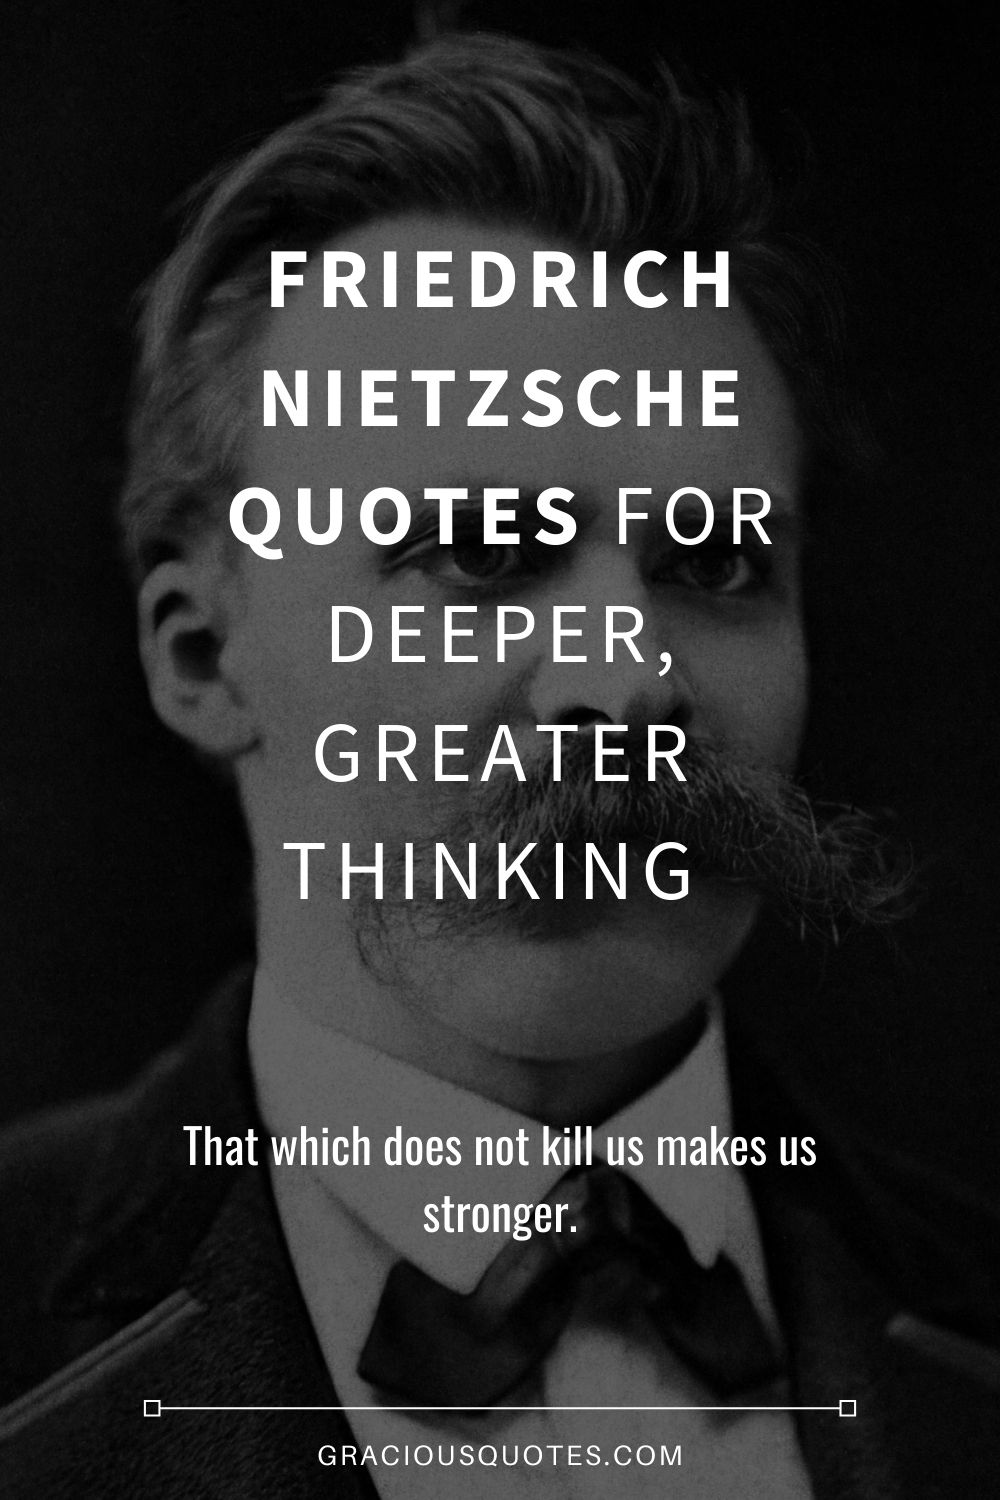 Friedrich-Nietzsche-Quotes-for-Deeper-Greater-Thinking-Gracious-Quotes